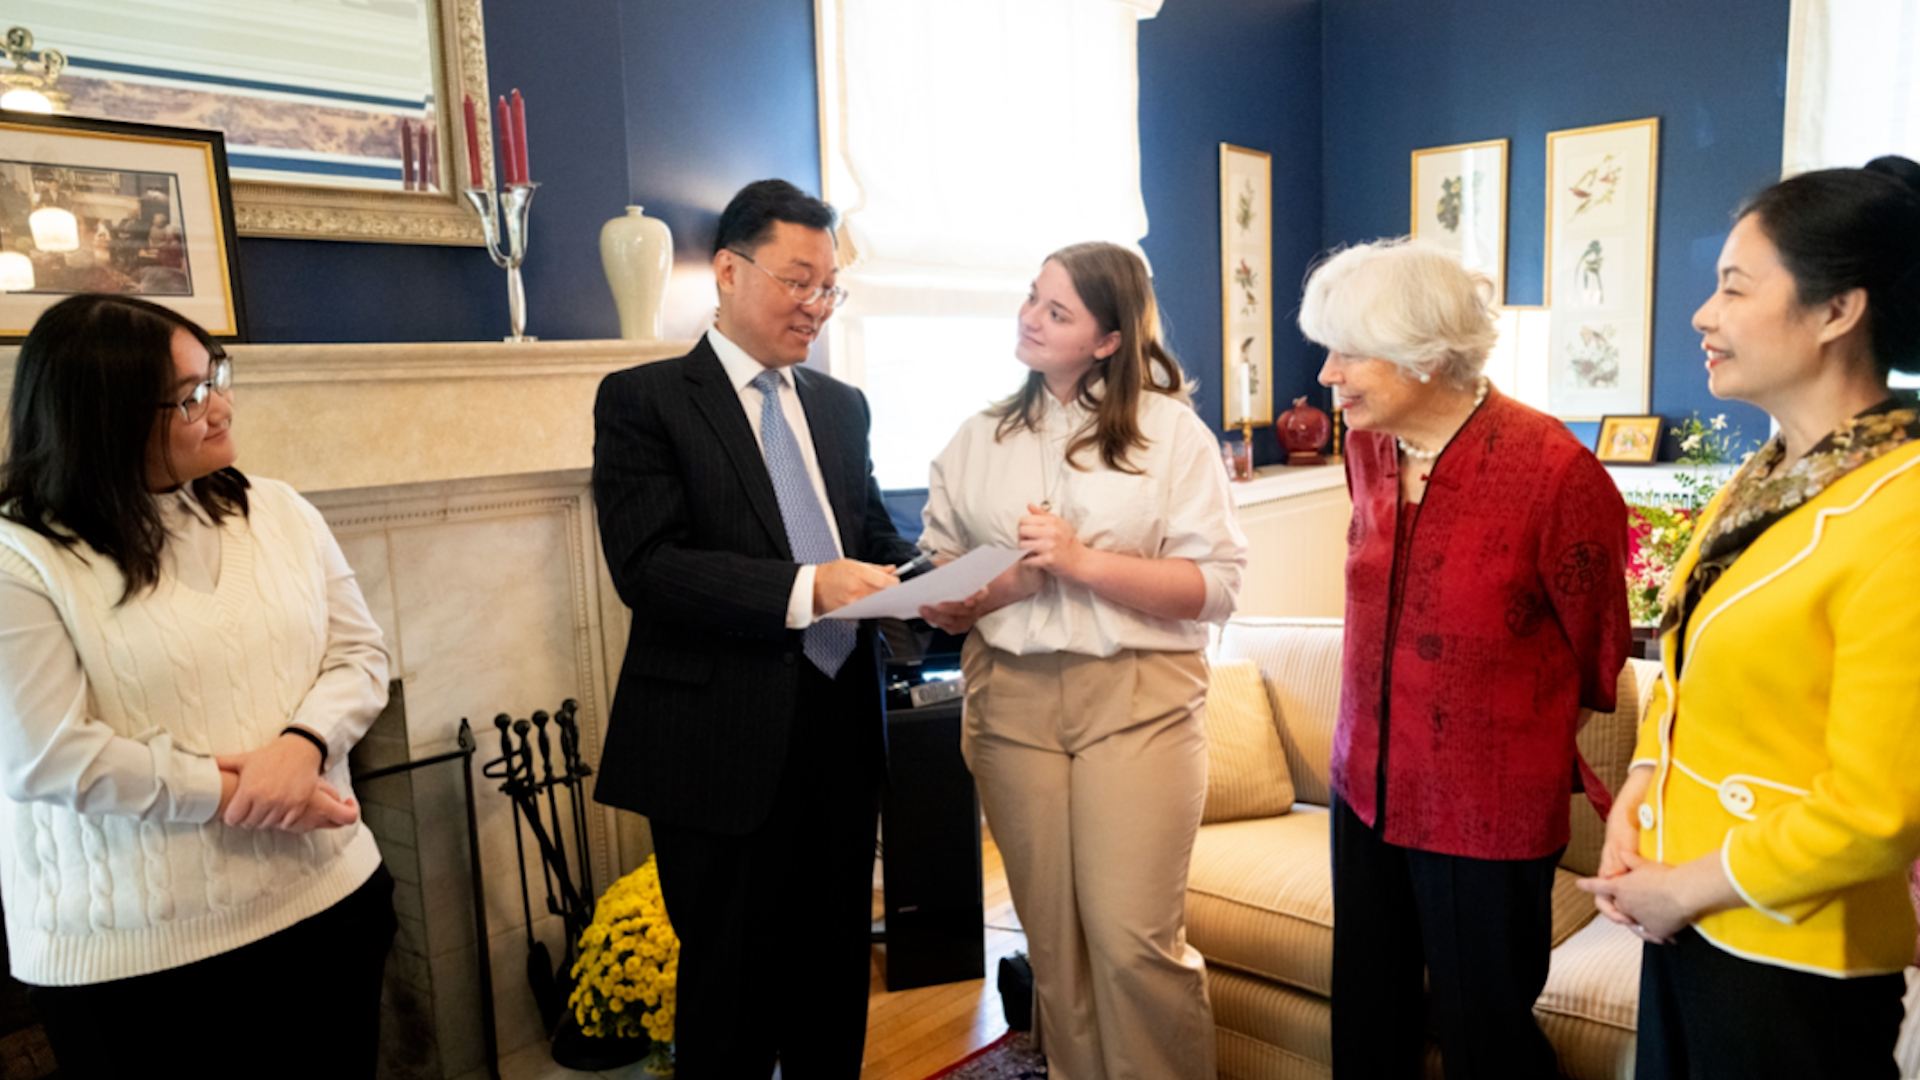 Ambassador Xie Feng discusses China-U.S. relations during his visit to Iowa  